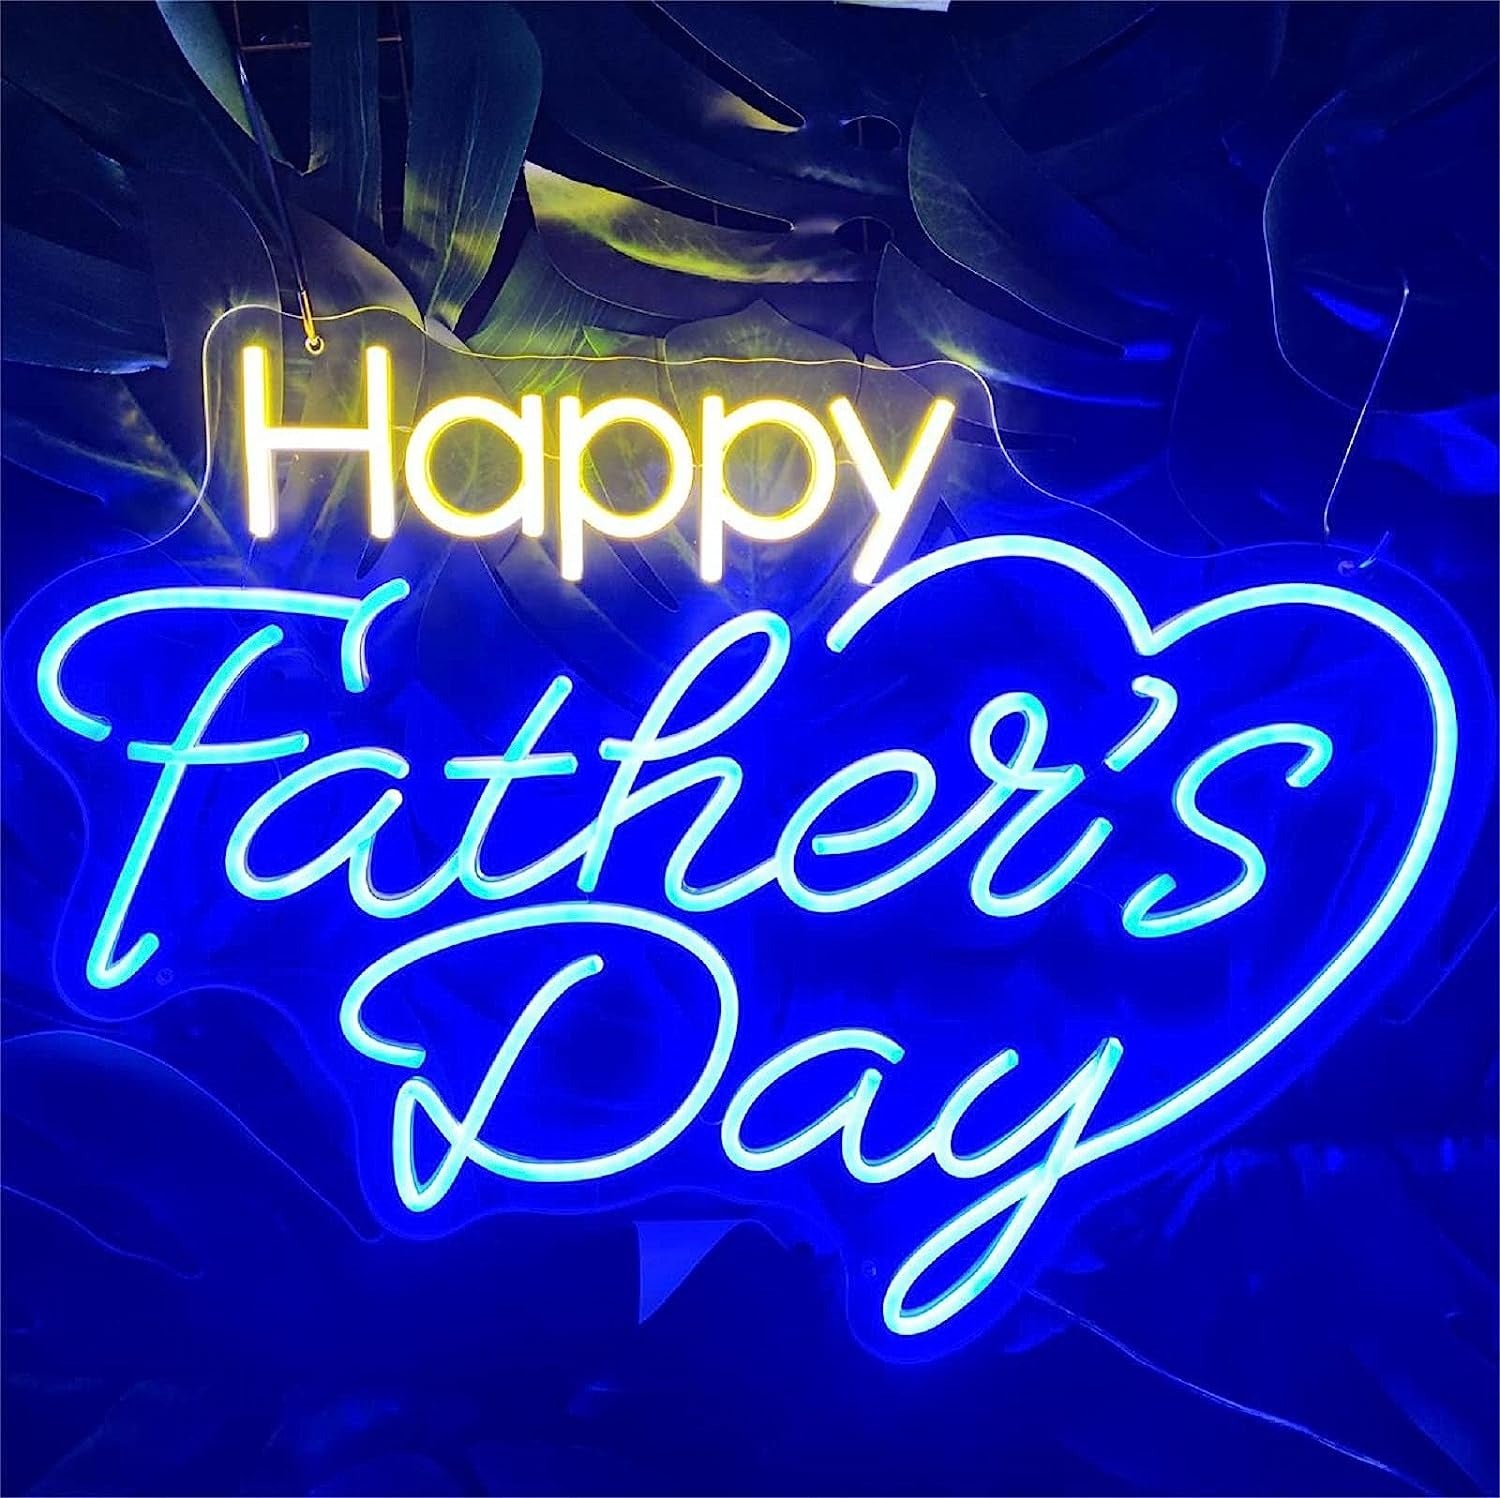 Surprising your dad with a Father's Day neon light gift at the entrance